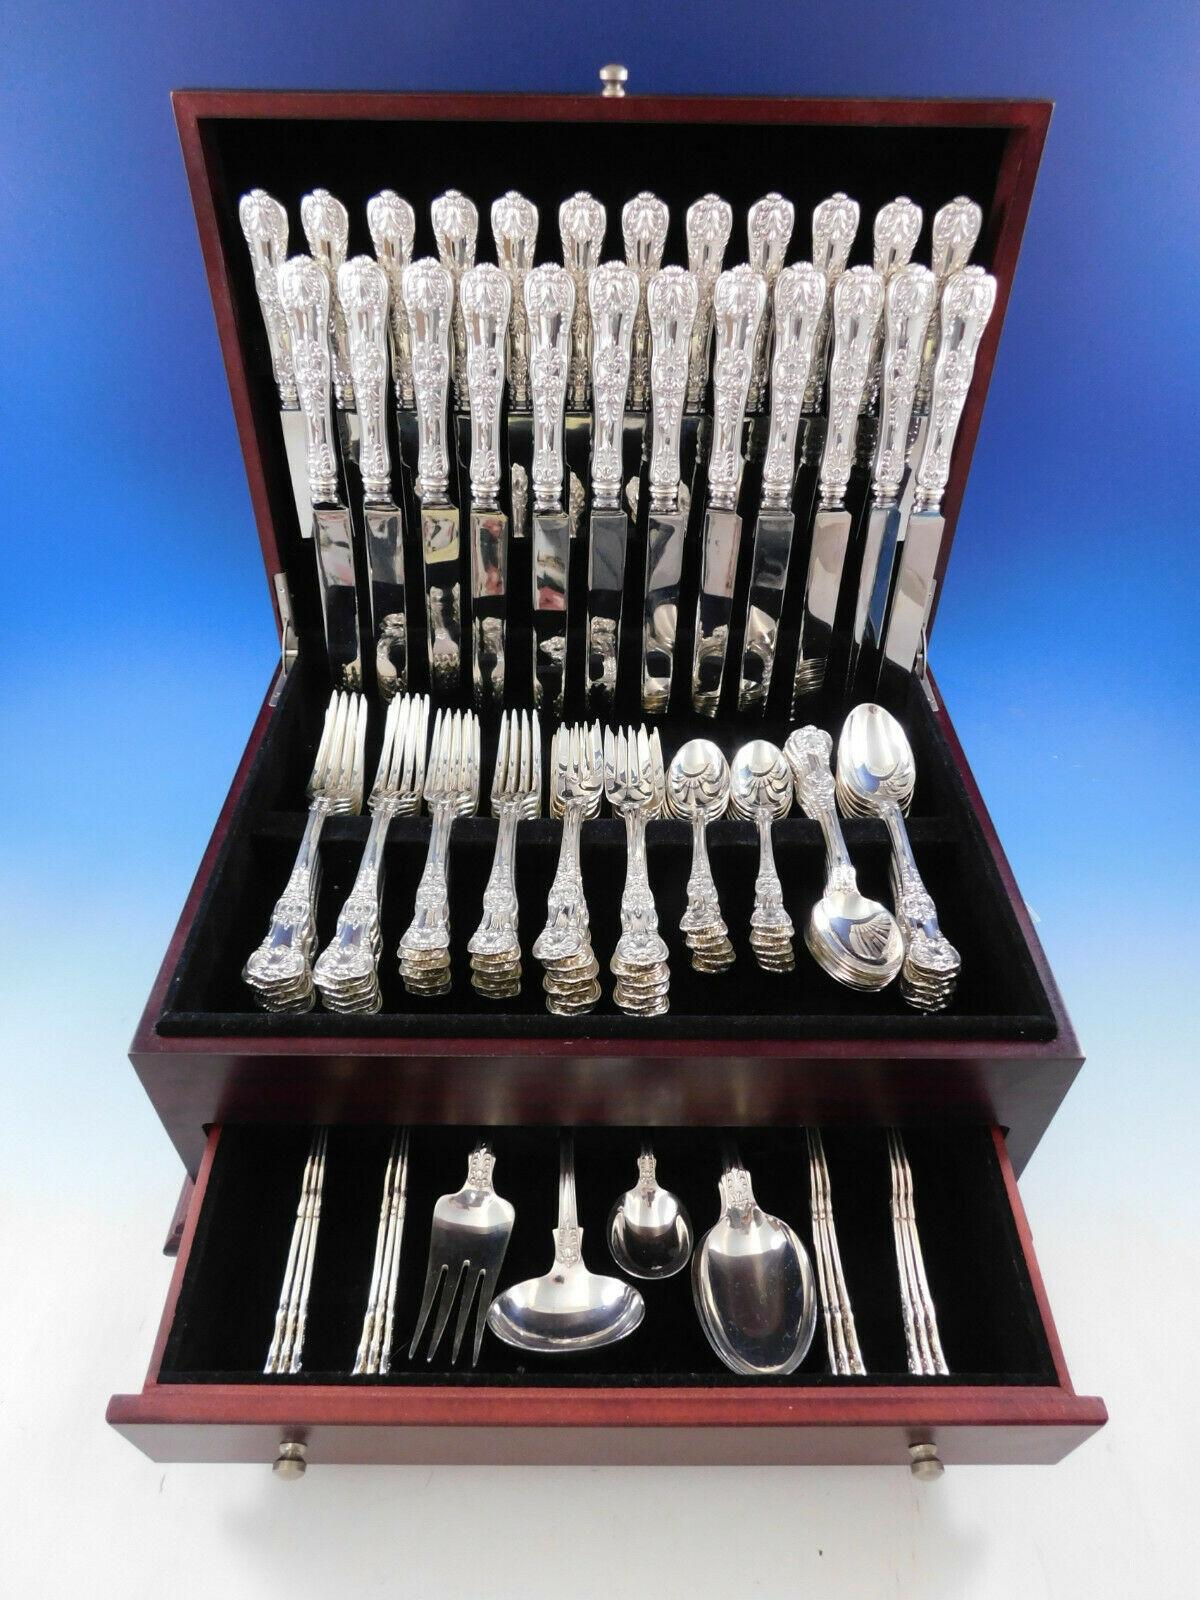 Monumental English King by Tiffany & Co. sterling silver Flatware set, 101 pieces. This set includes:

12 dinner size knives, 10